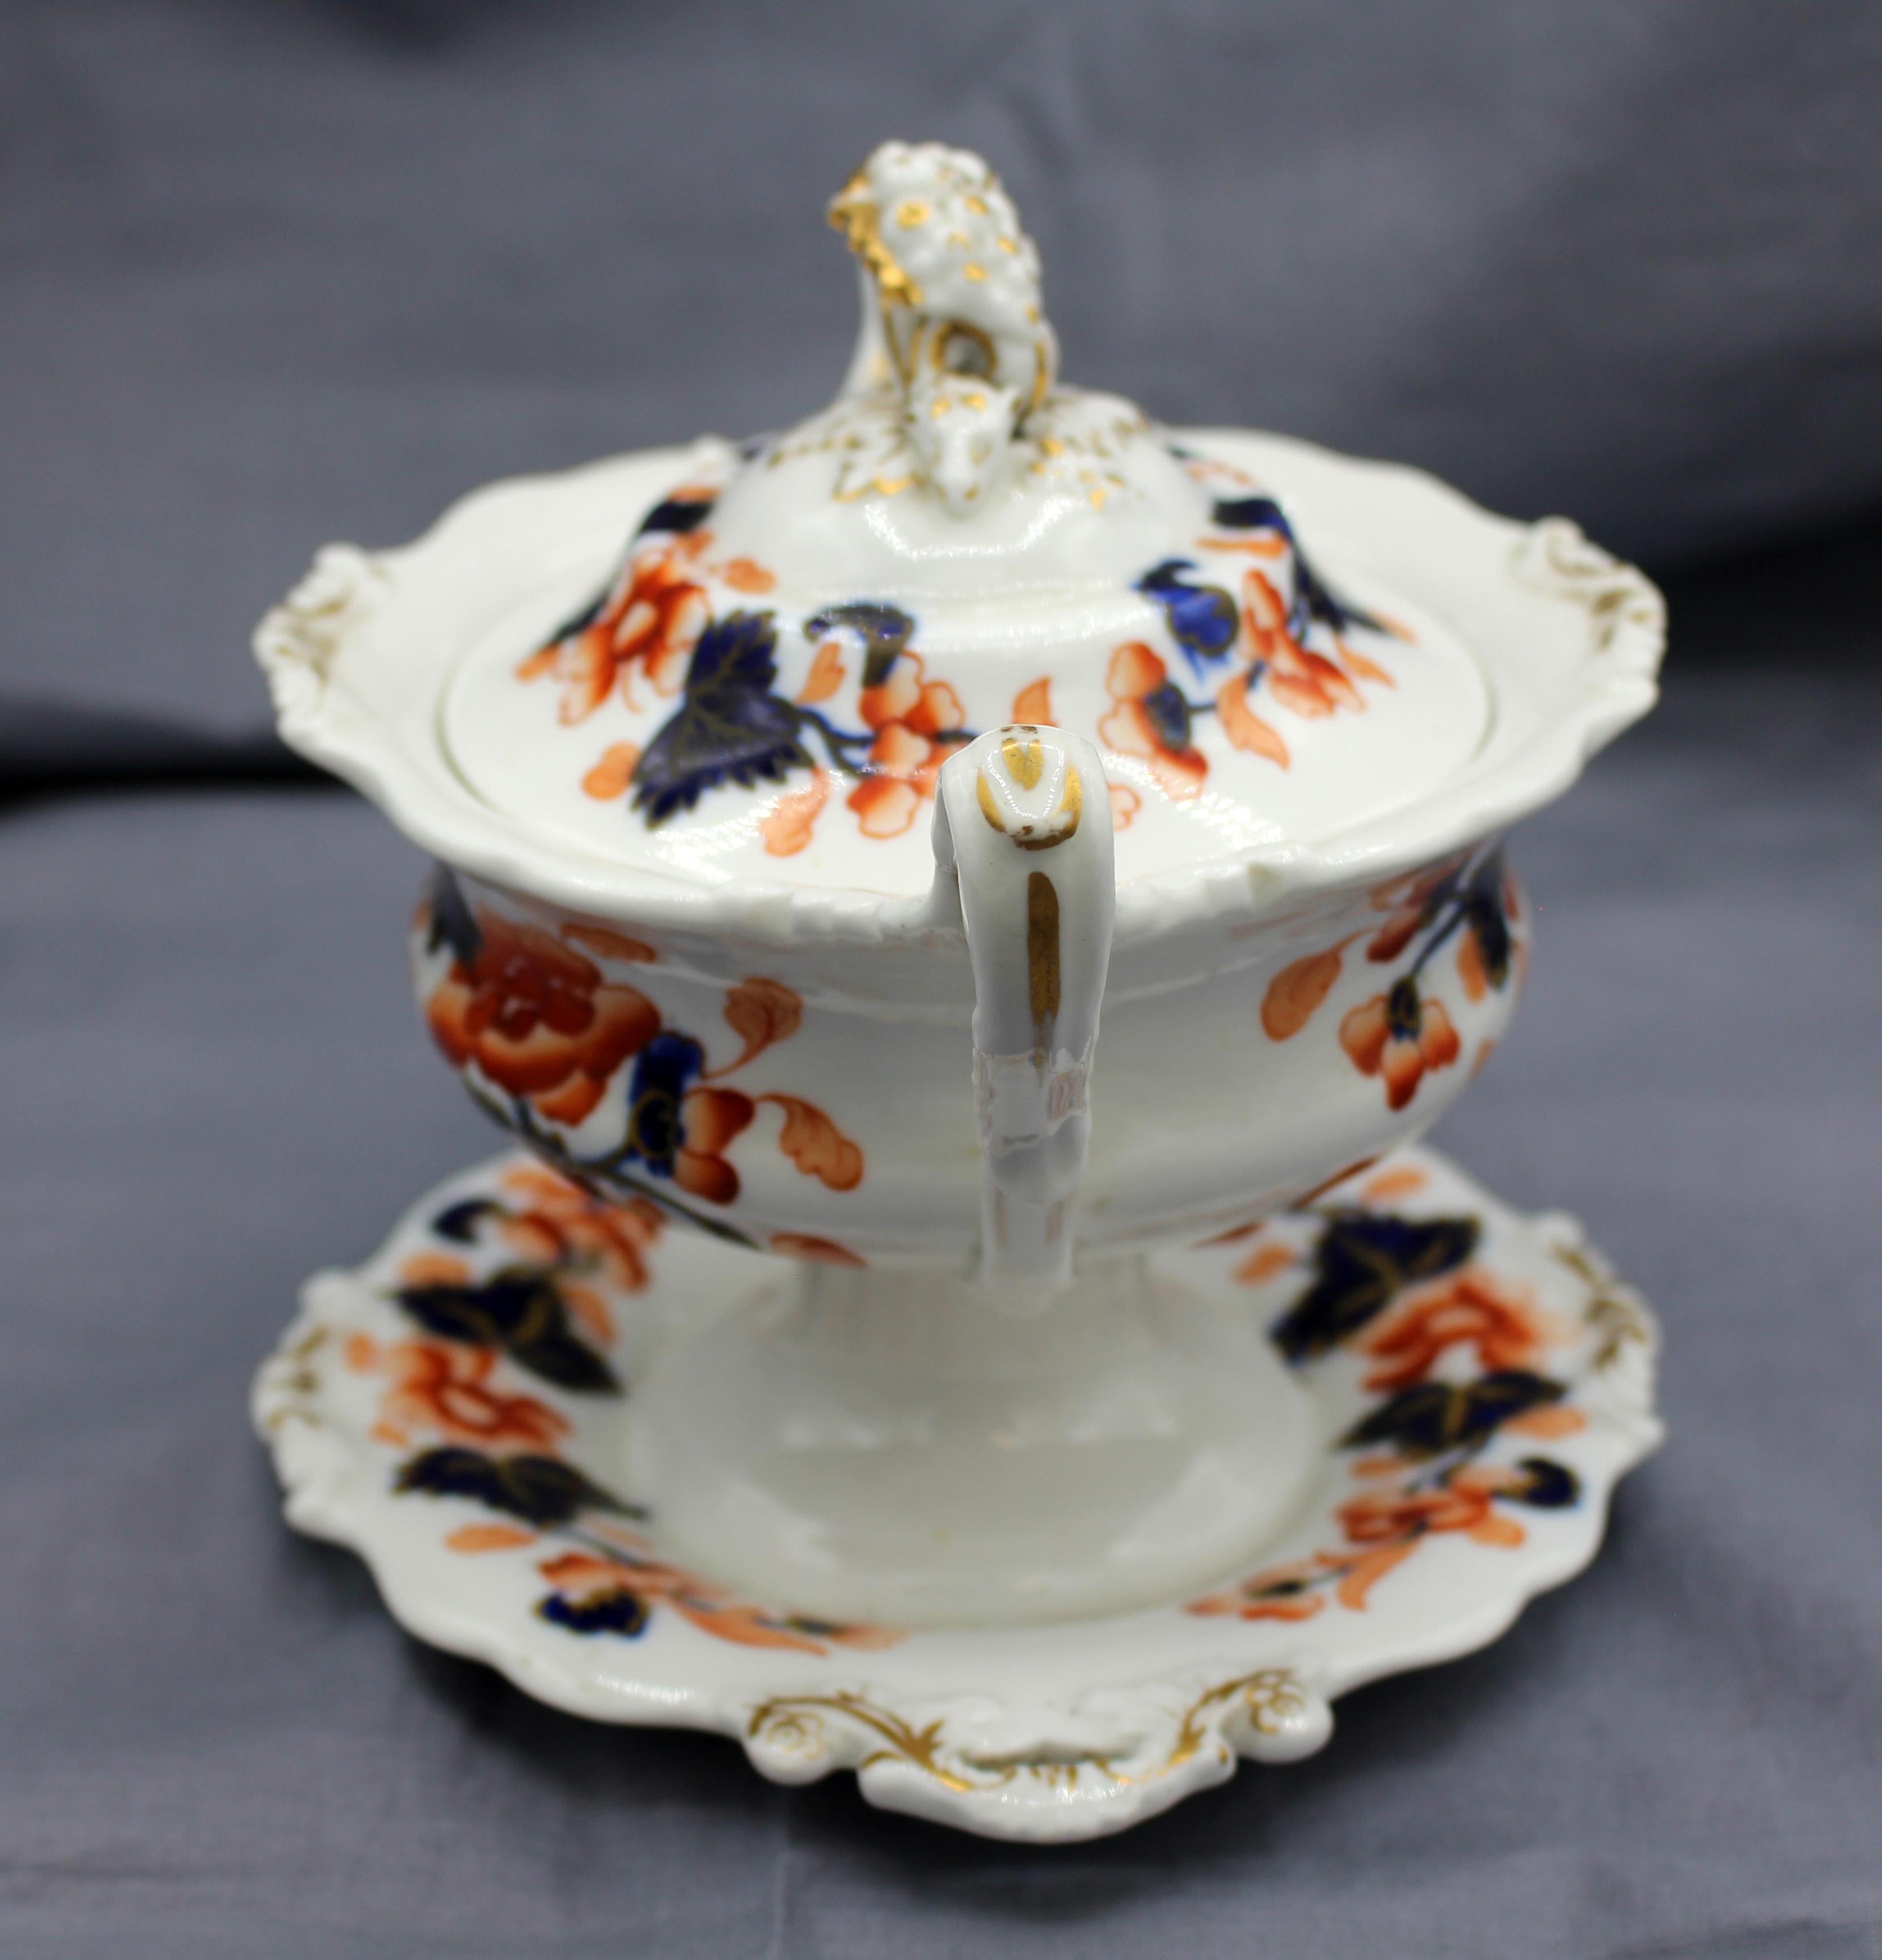 Circa 1830 English Classical period ironstone sauce tureen, integral stand & cover, Imari pattern. Finial a cornucopia with head of a fawn tip.